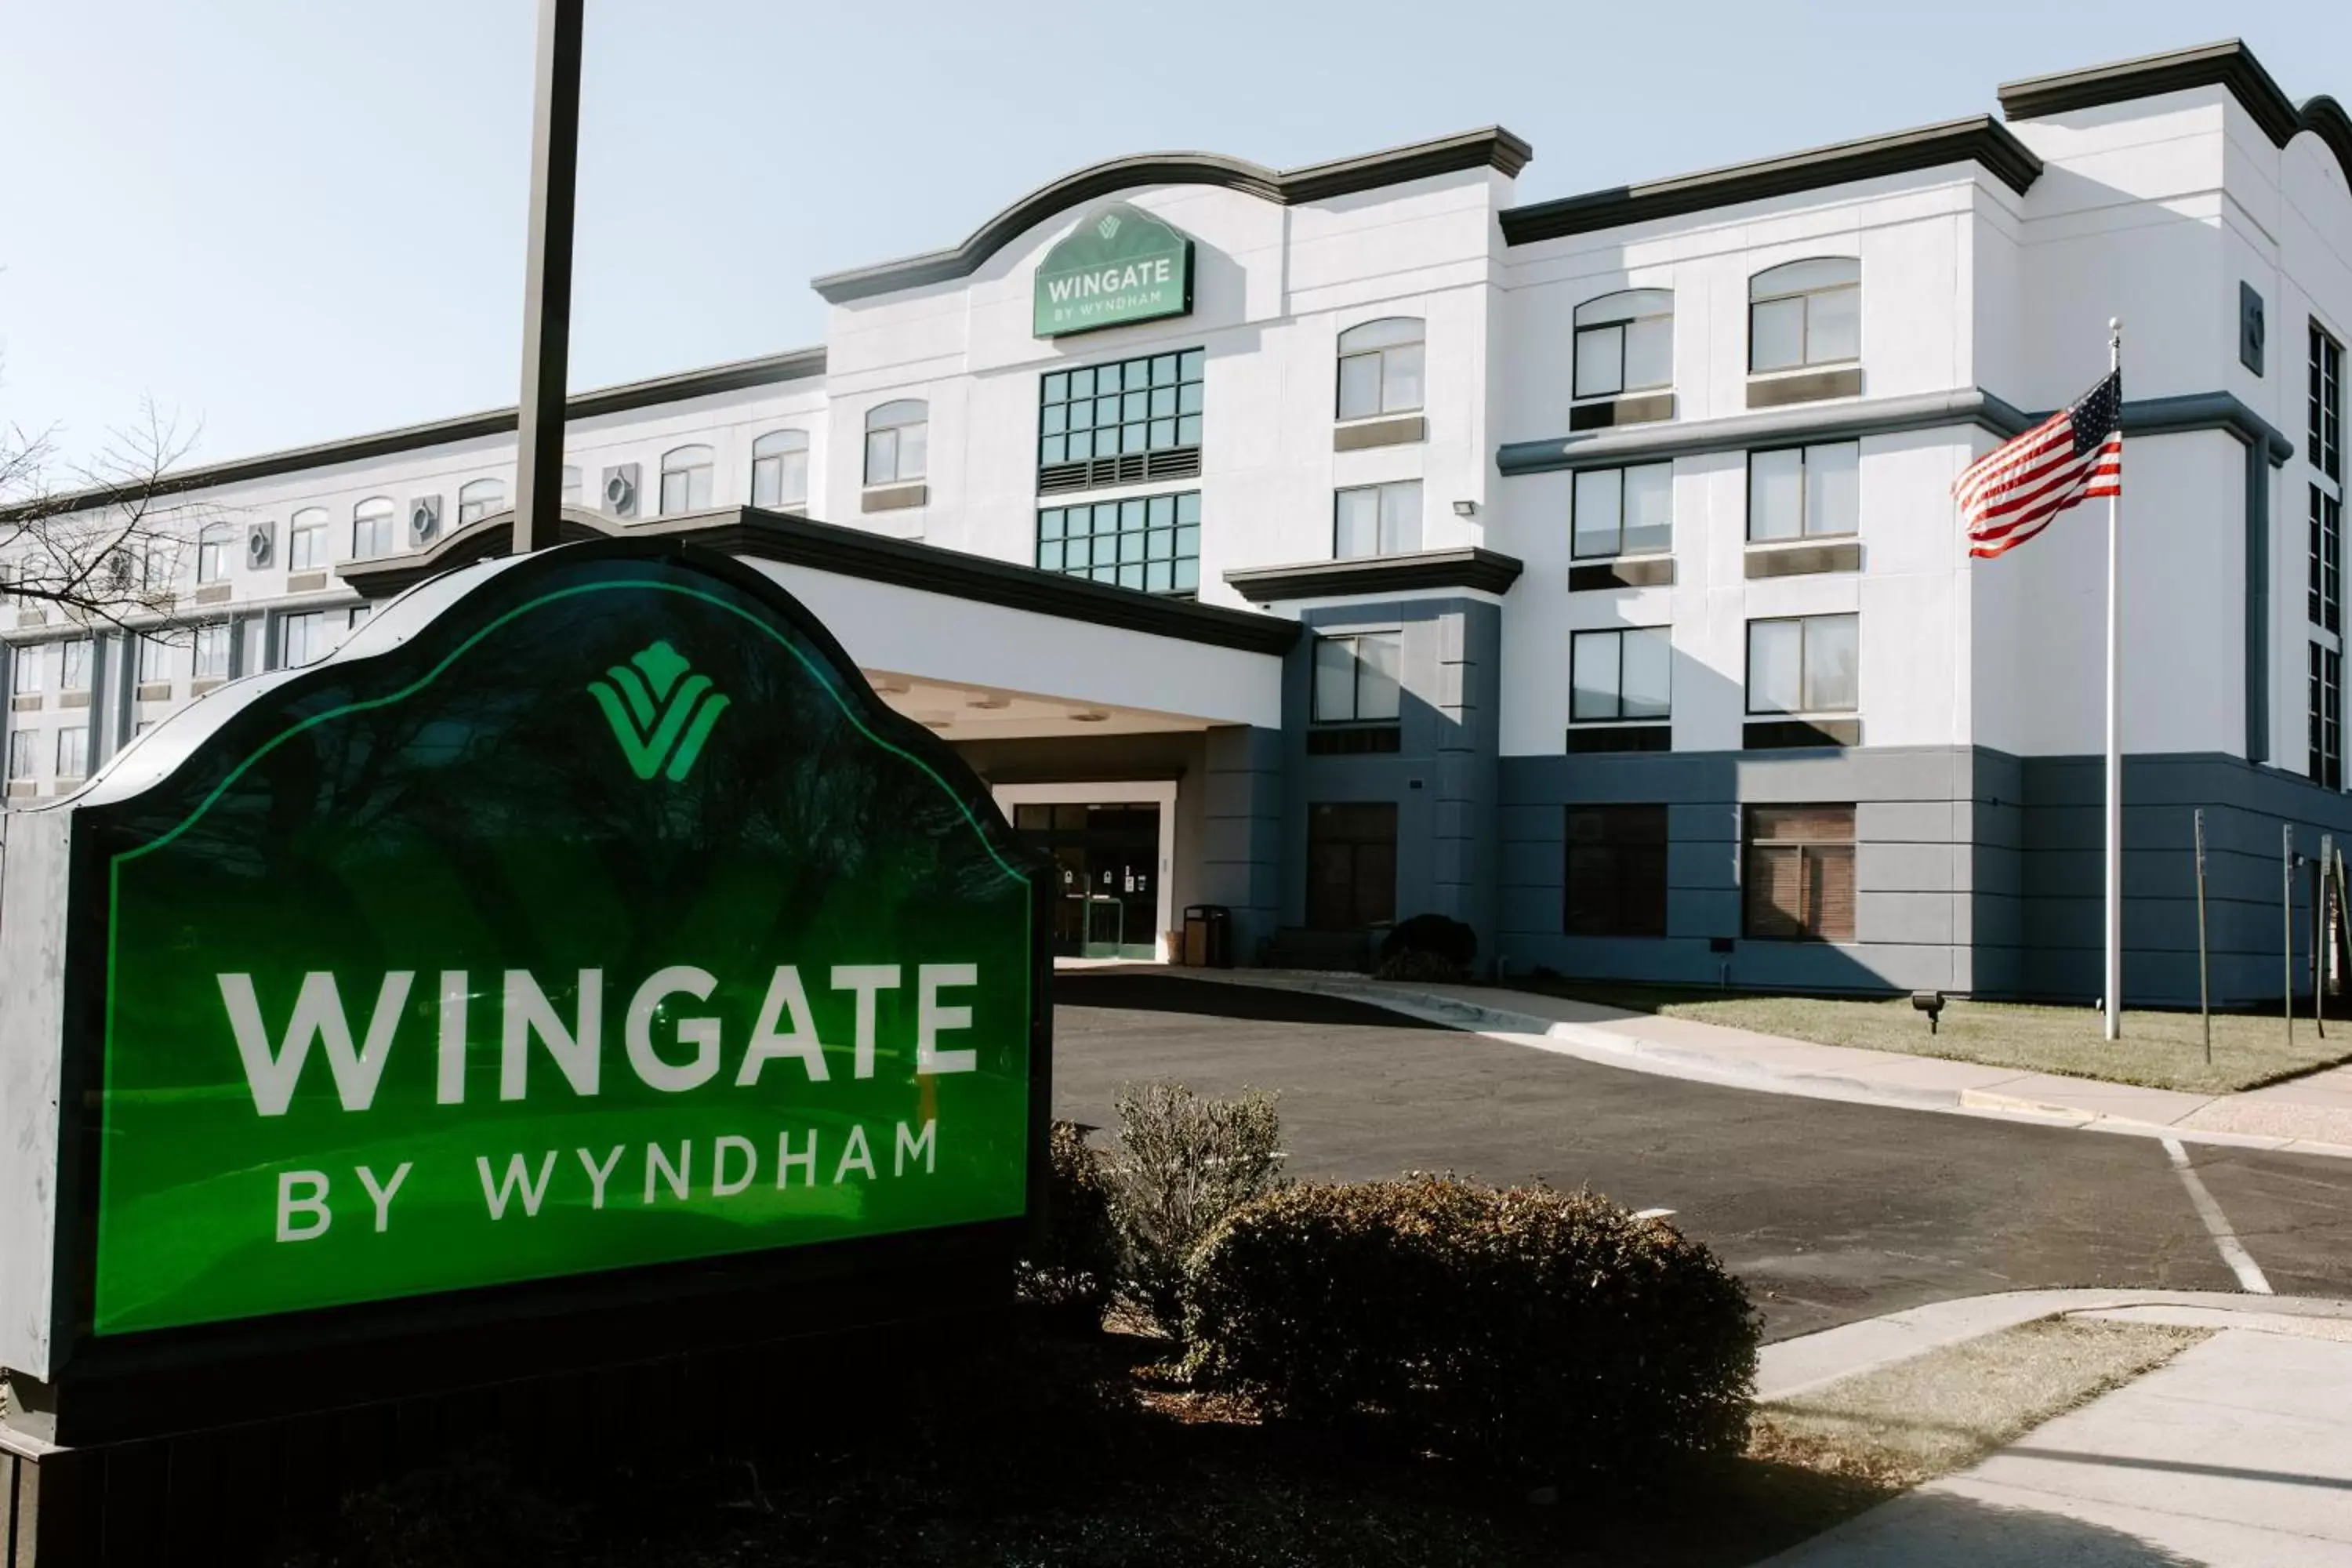 Property building in Wingate by Wyndham - Dulles International